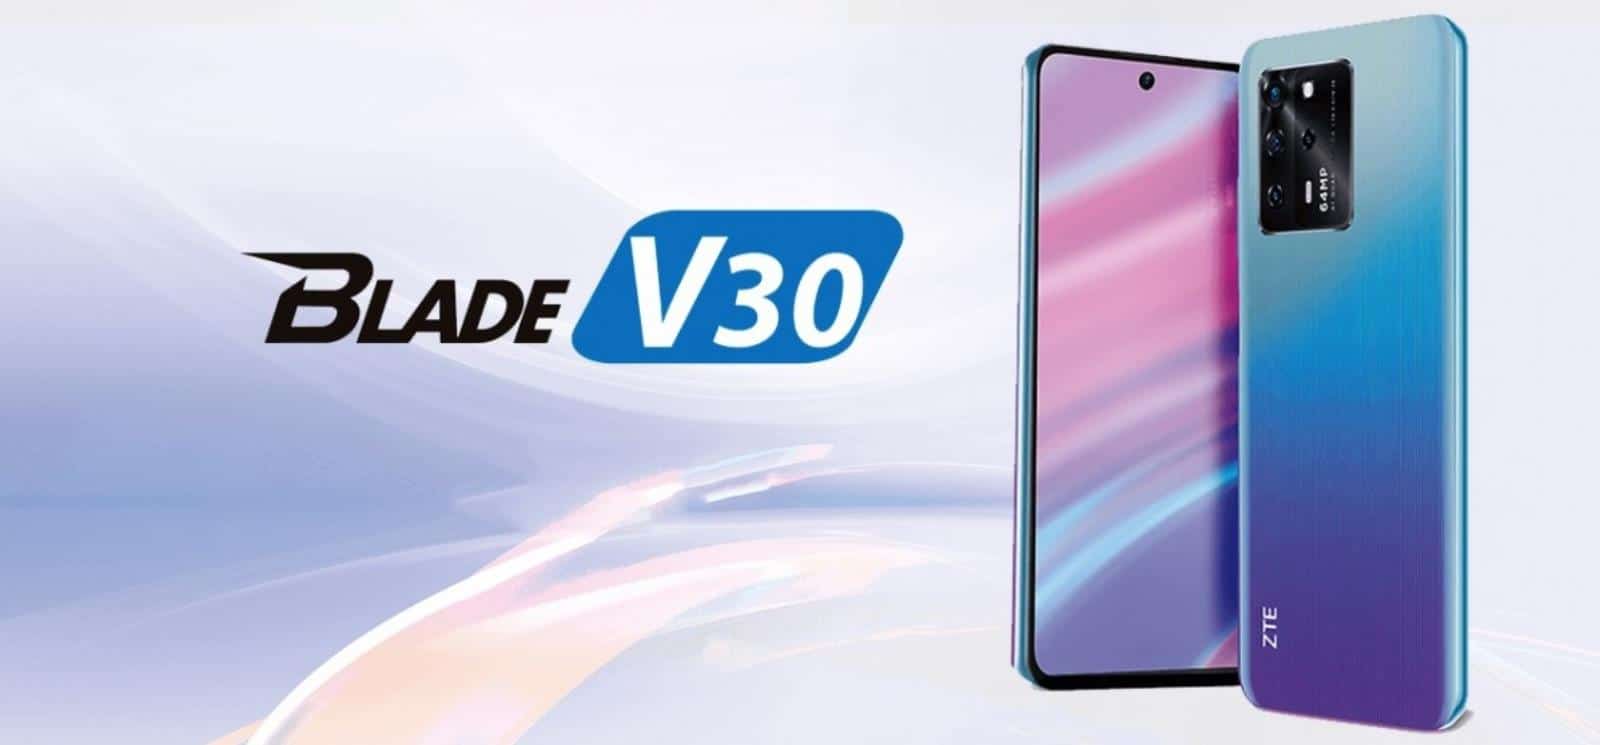 Affordable mediums from ZTE made their debut.  This is the Blade V30